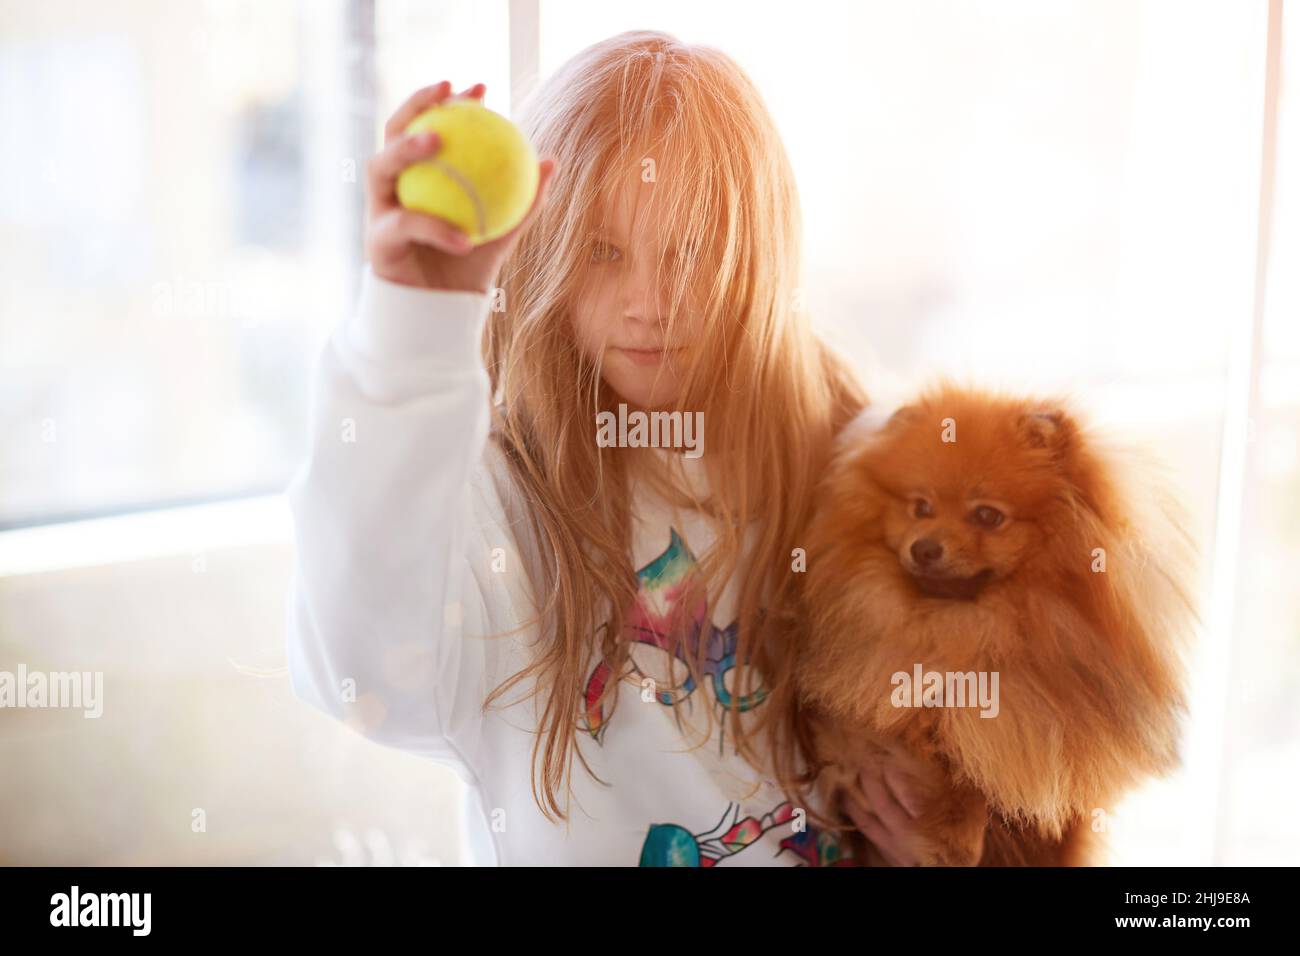 Cute child playing with his dog friend on the window. soft focus Stock Photo